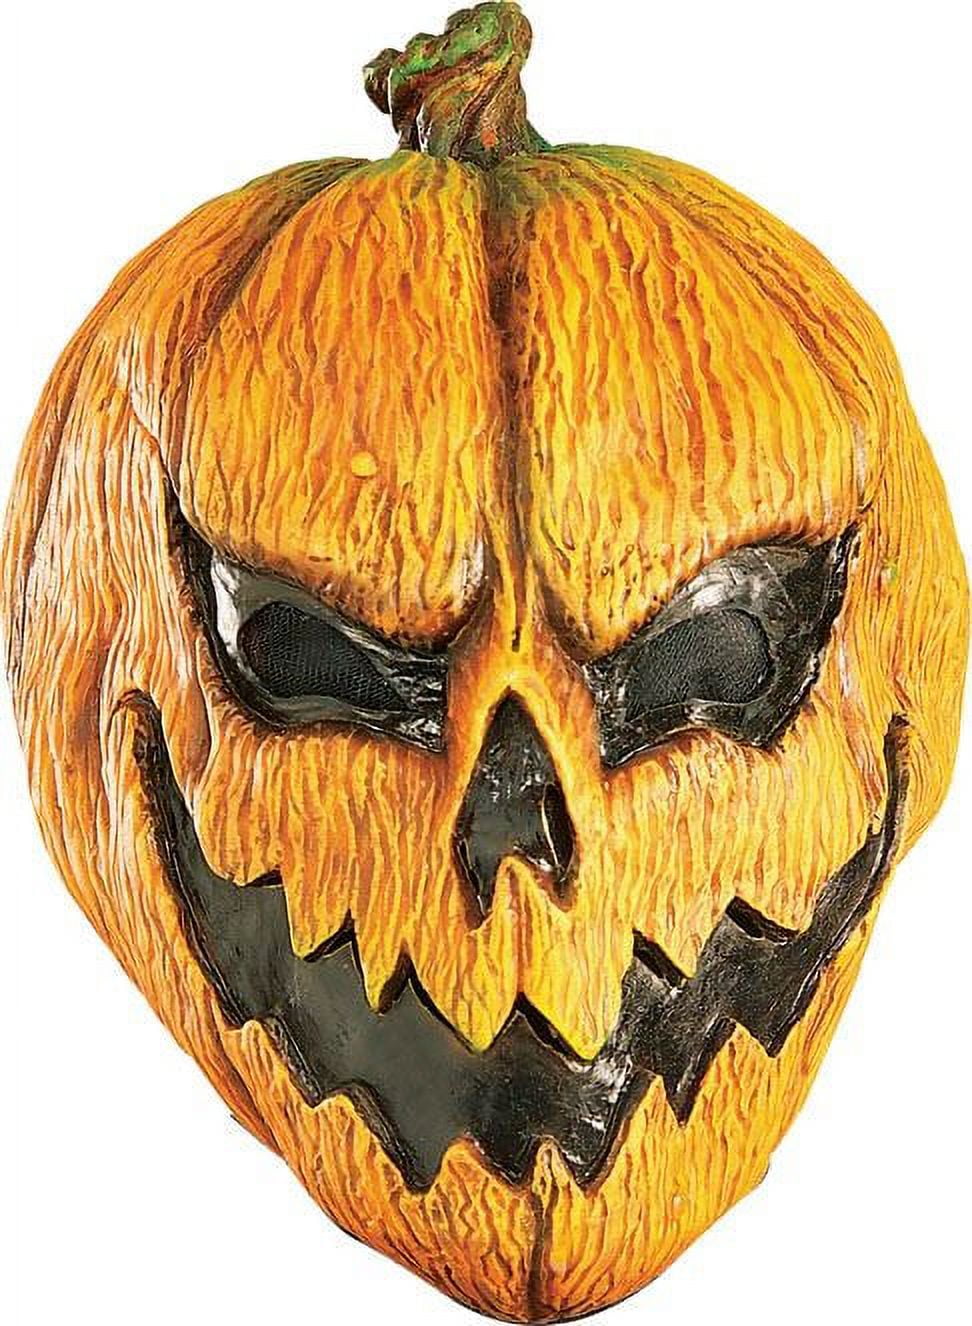 Vintage 80s Gross Scary Repulsive Rotting Pumpkin Adult Halloween Face Mask